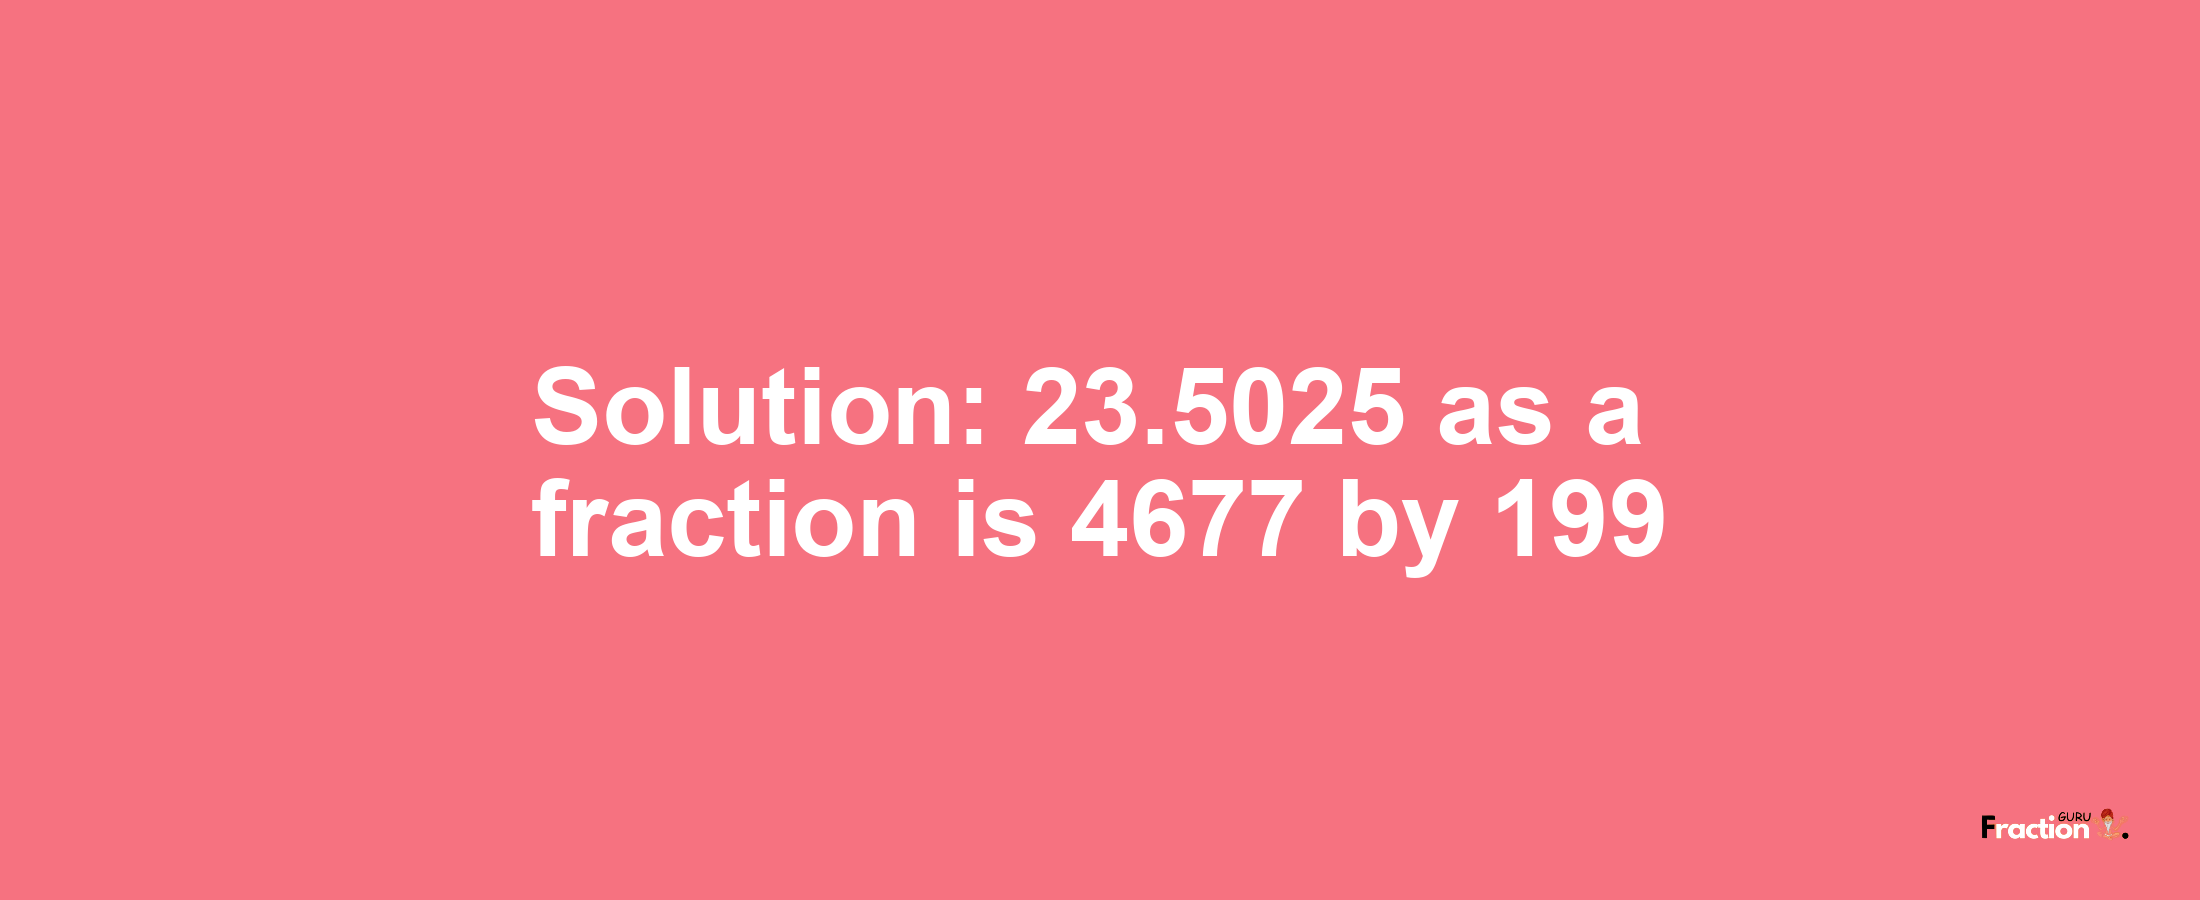 Solution:23.5025 as a fraction is 4677/199